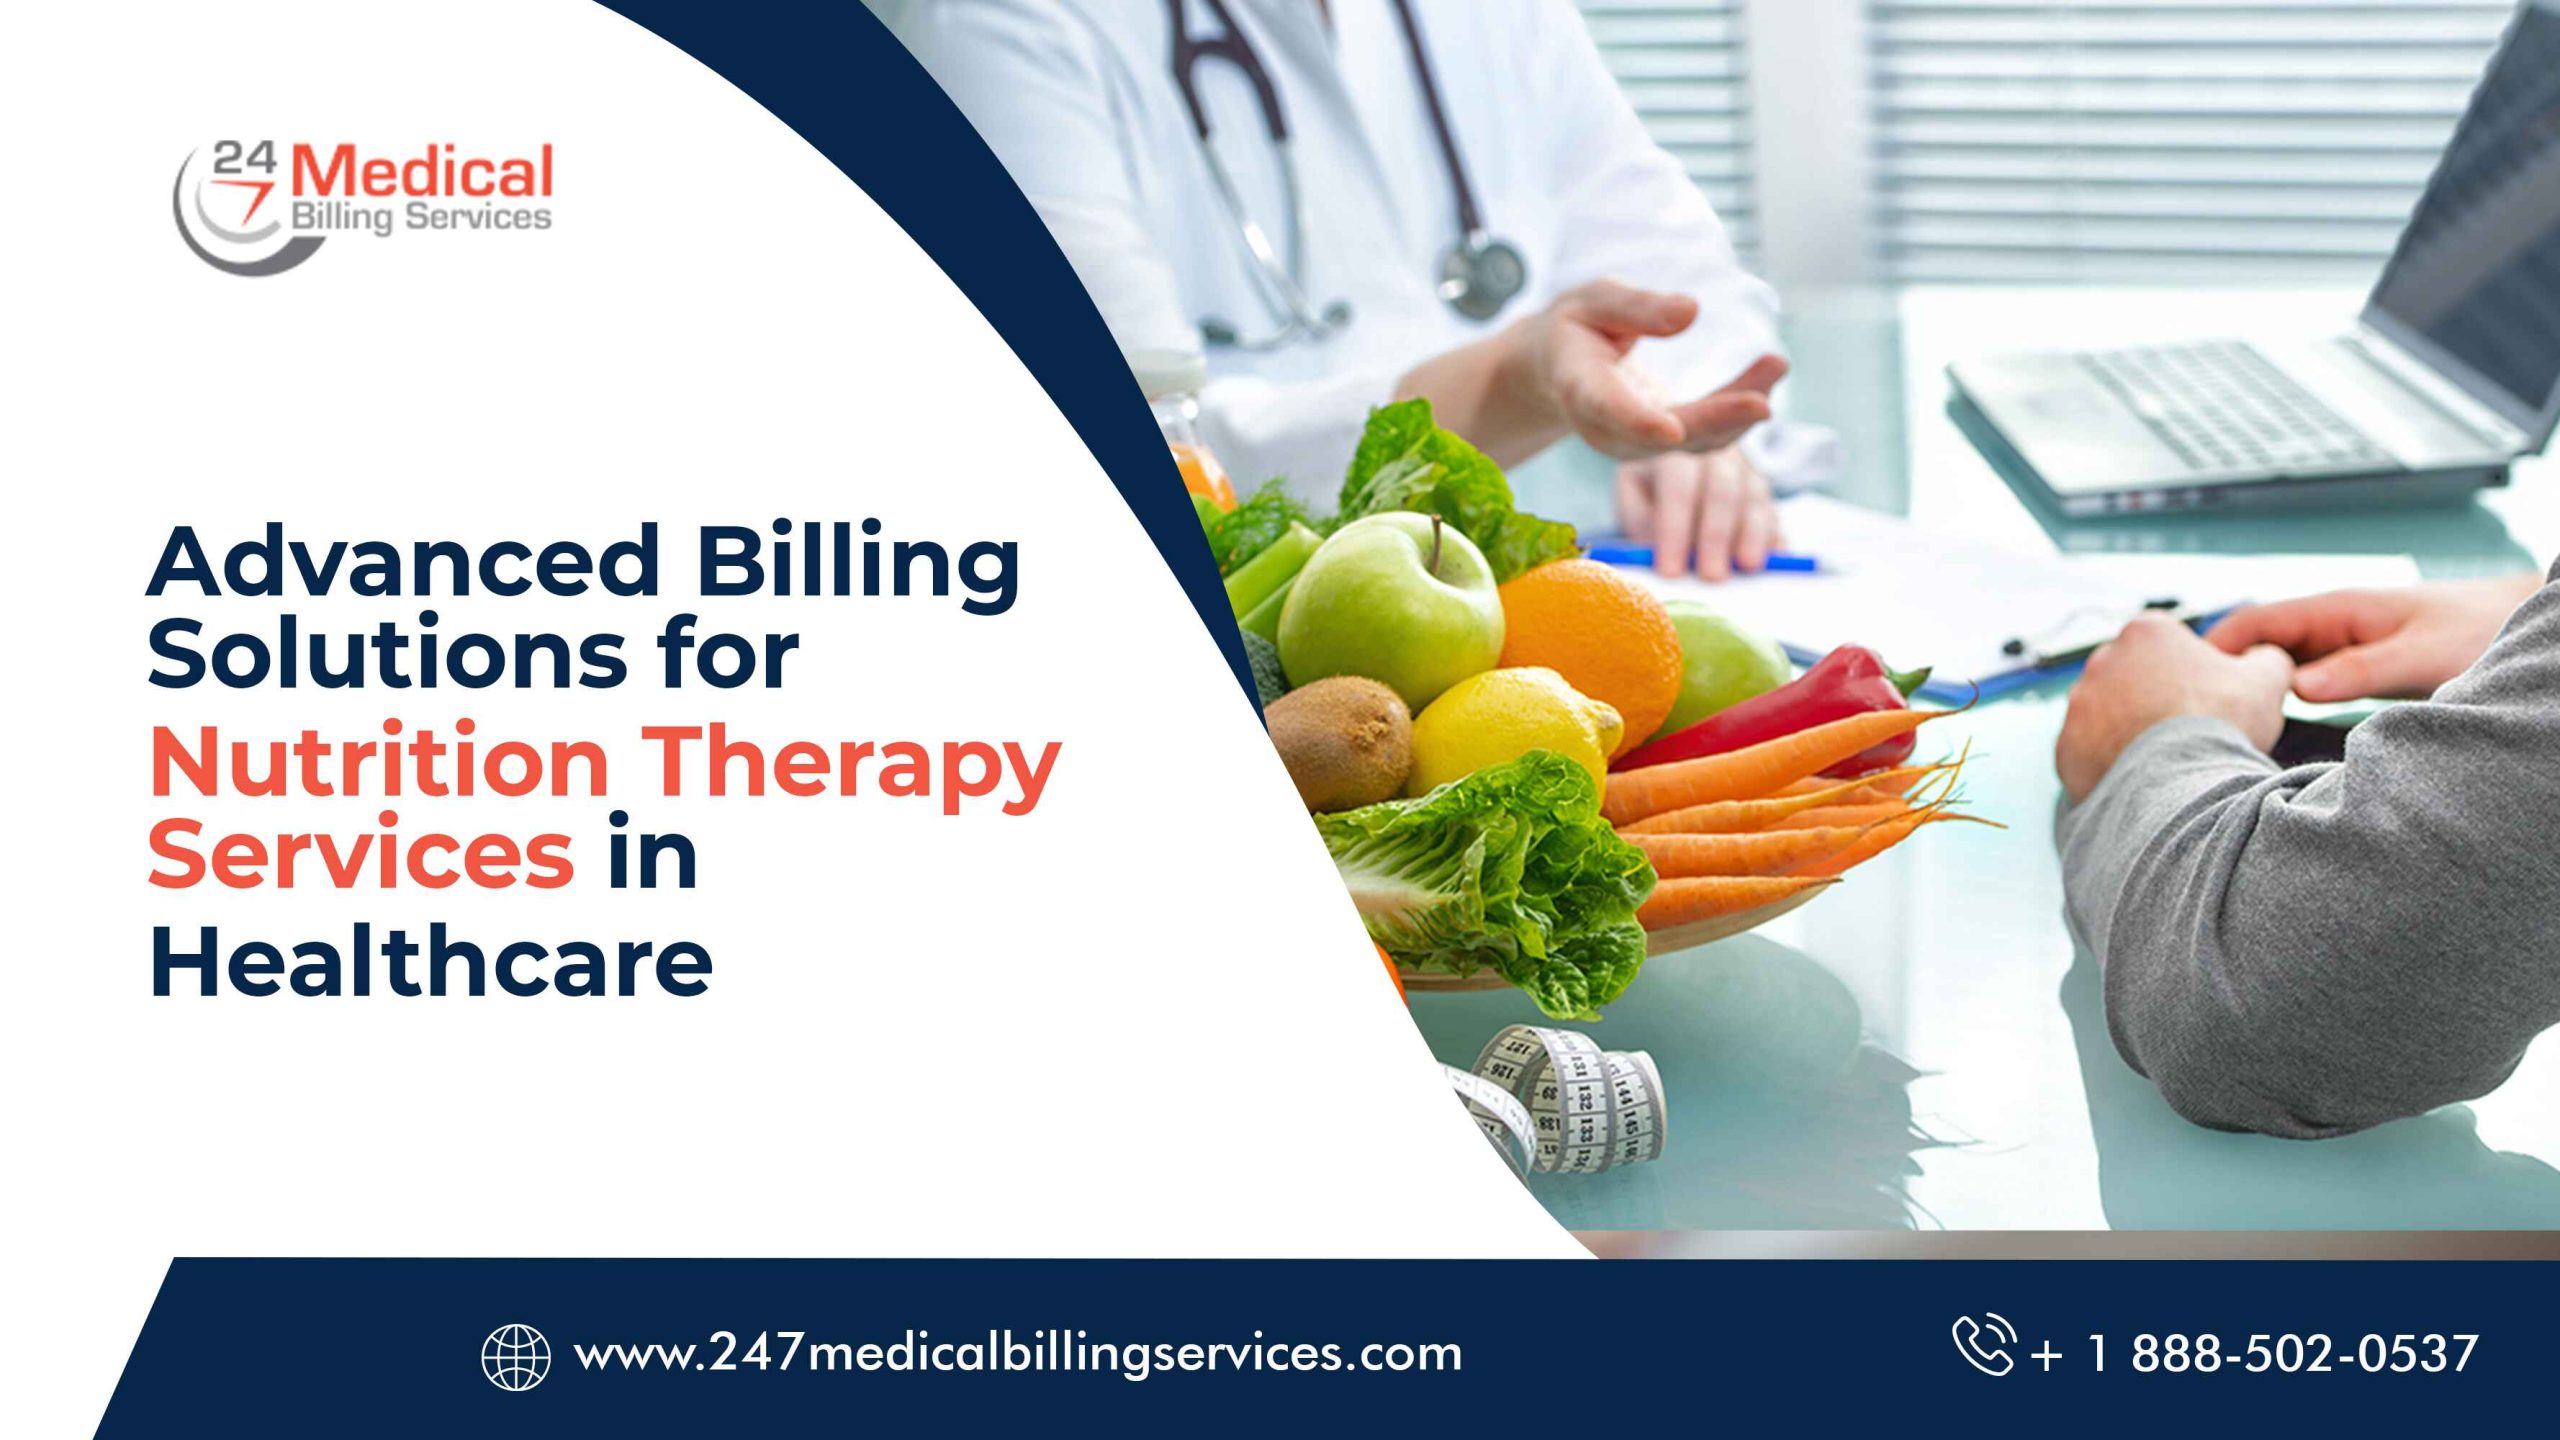  Advanced Billing Solutions for Nutrition Therapy Services in Healthcare